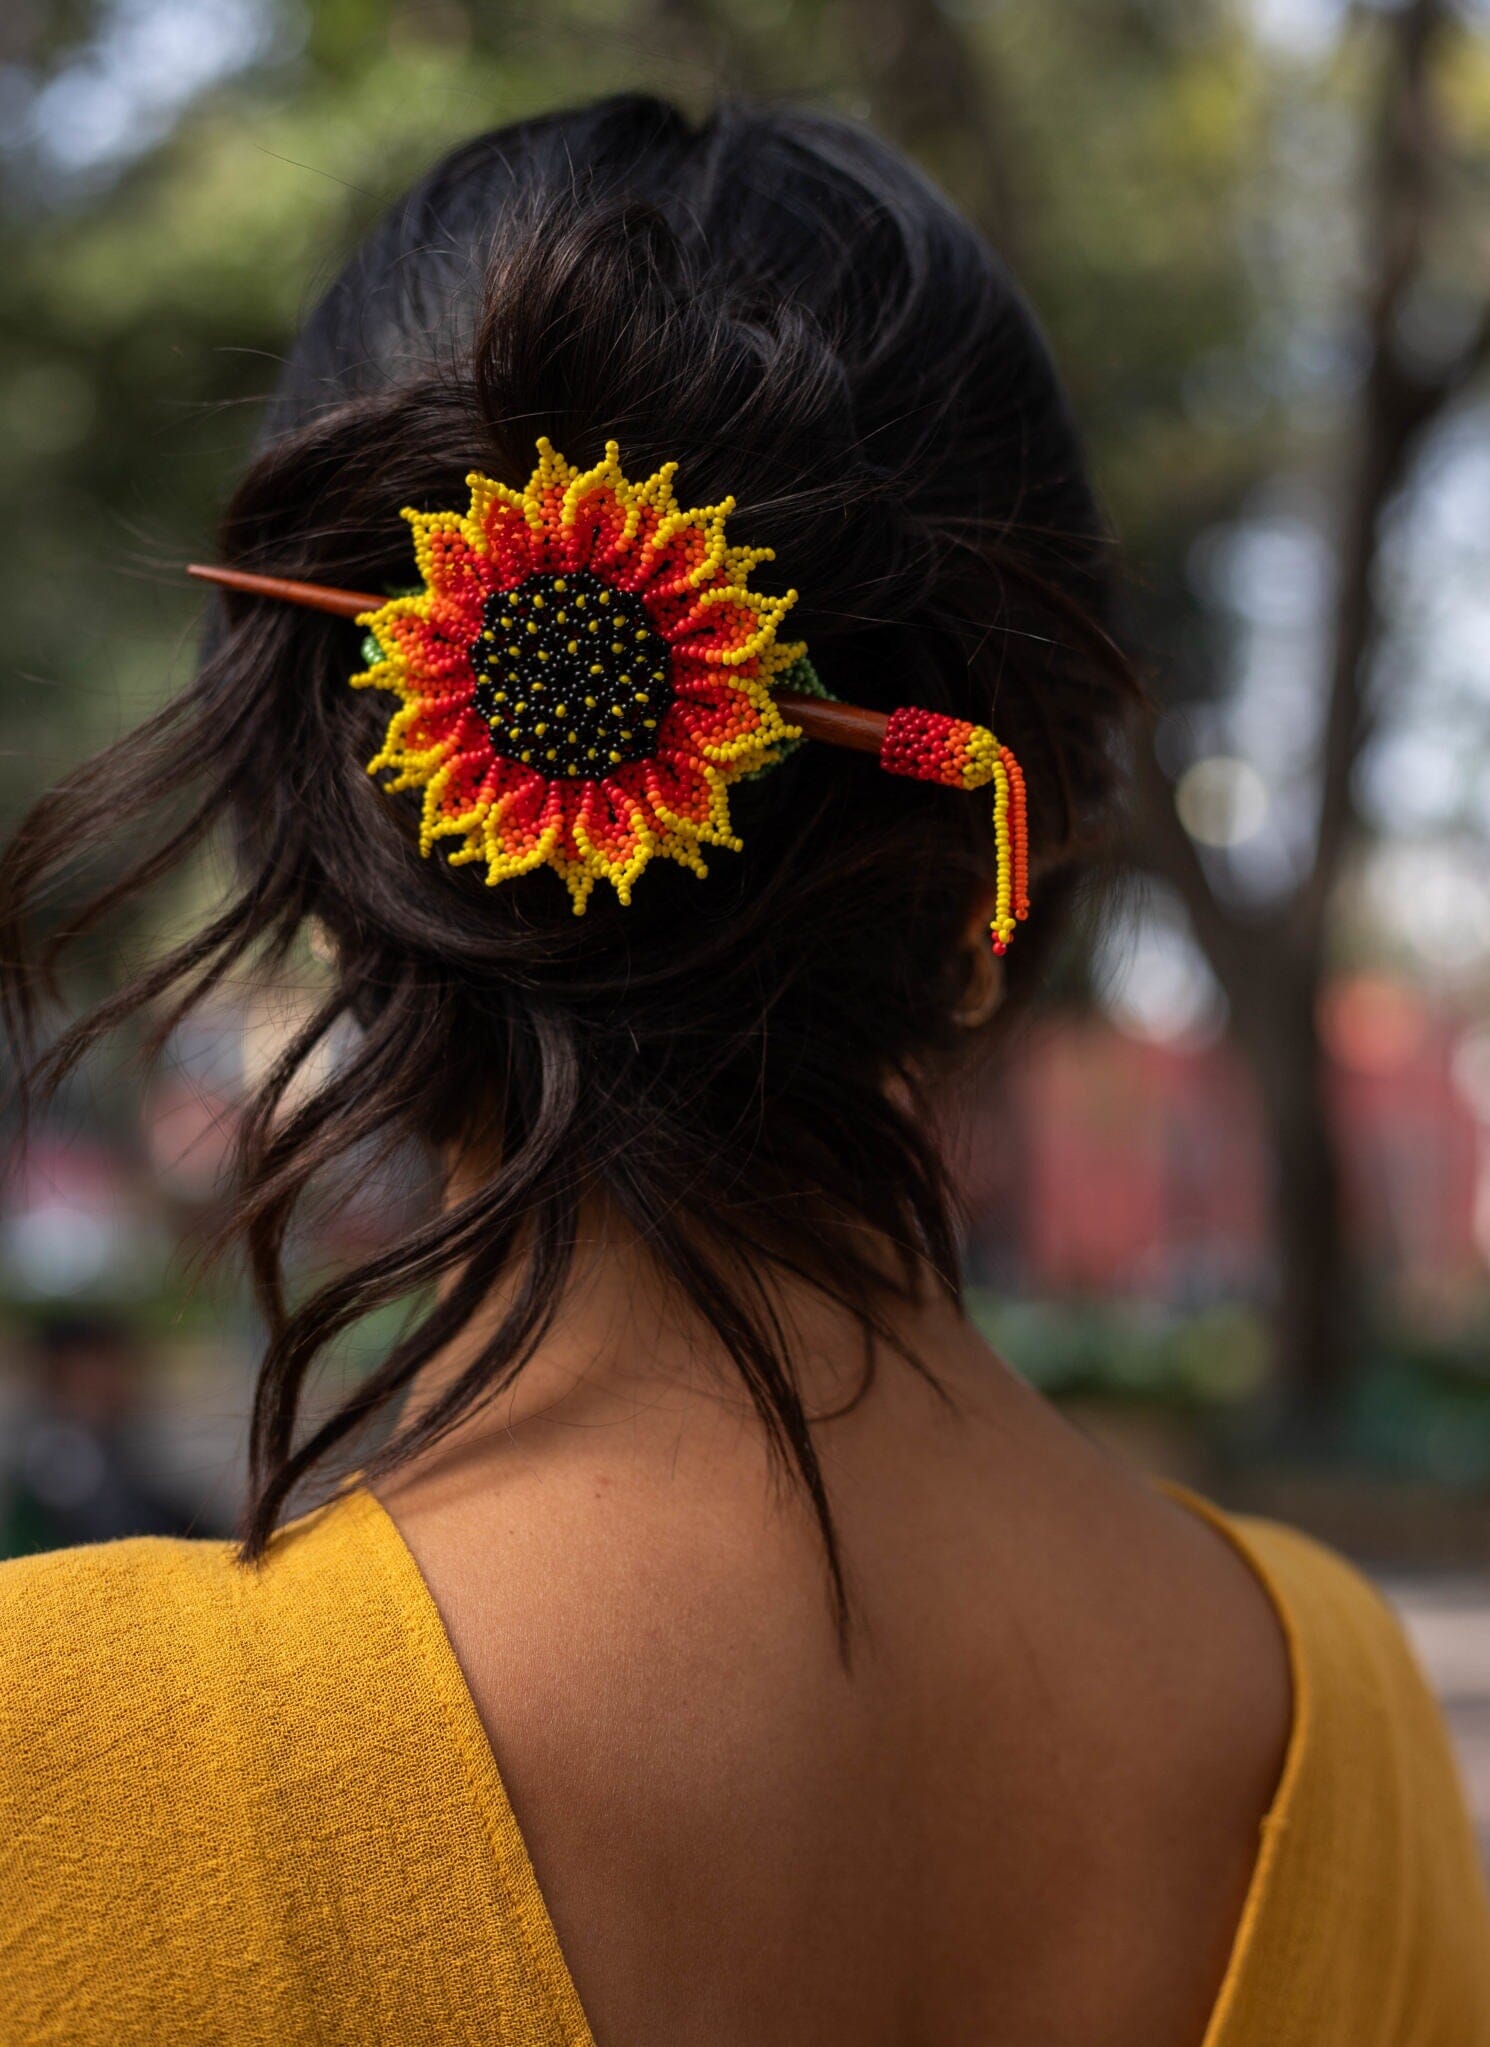 A bright sunflower petal yellow, red, green beaded hair barrette hairpiece, a Native American jewelry piece in dark hair.